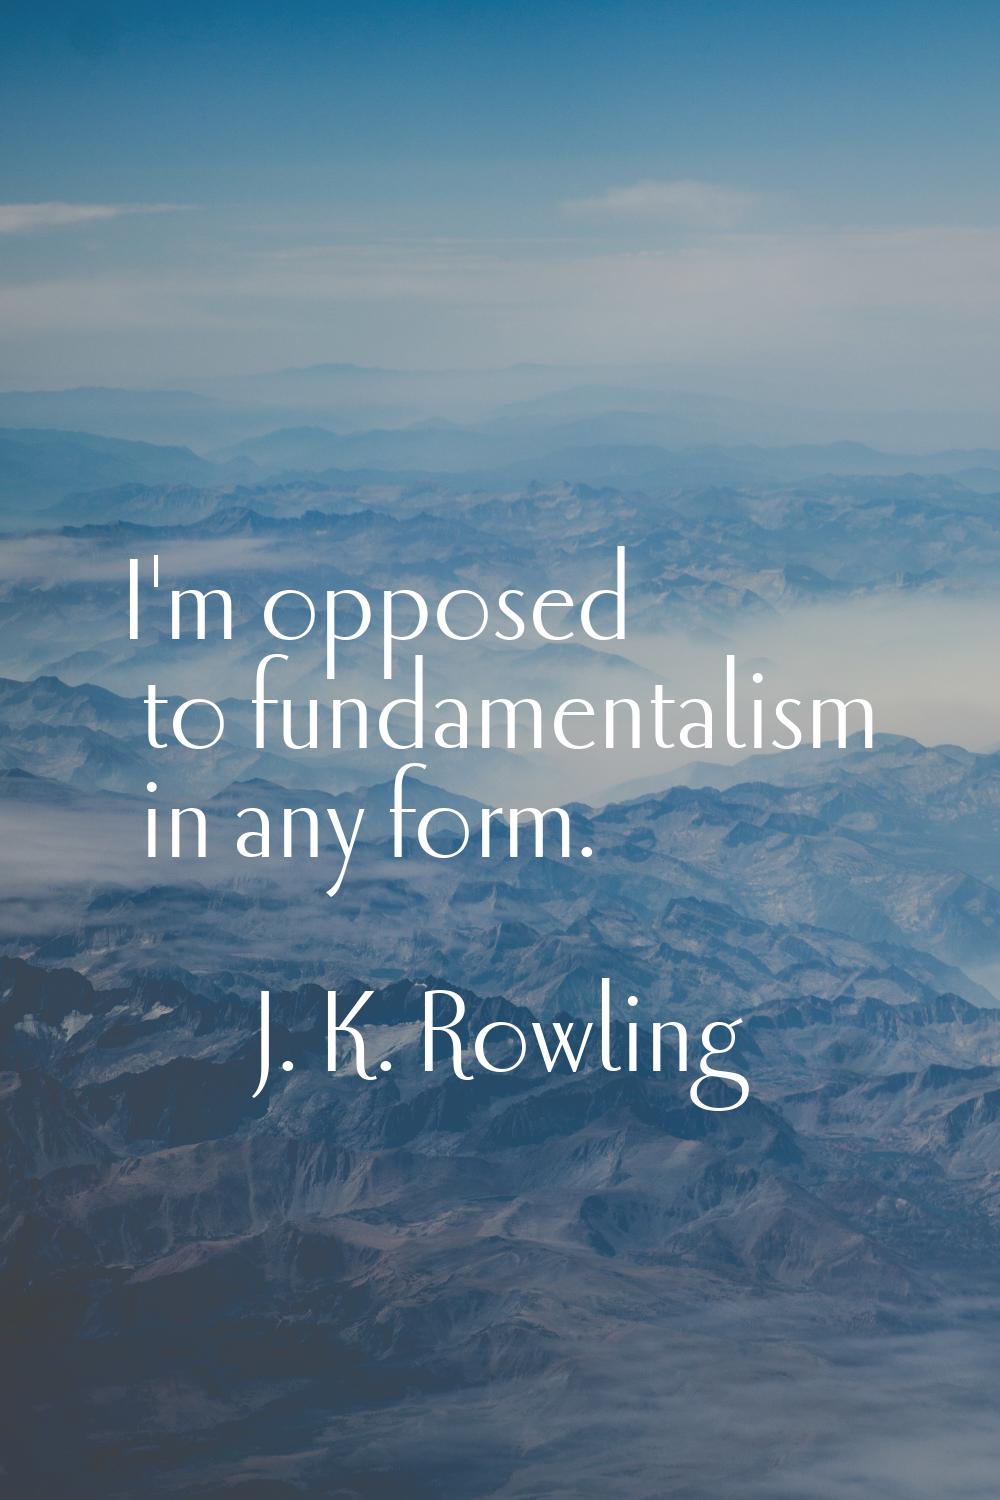 I'm opposed to fundamentalism in any form.